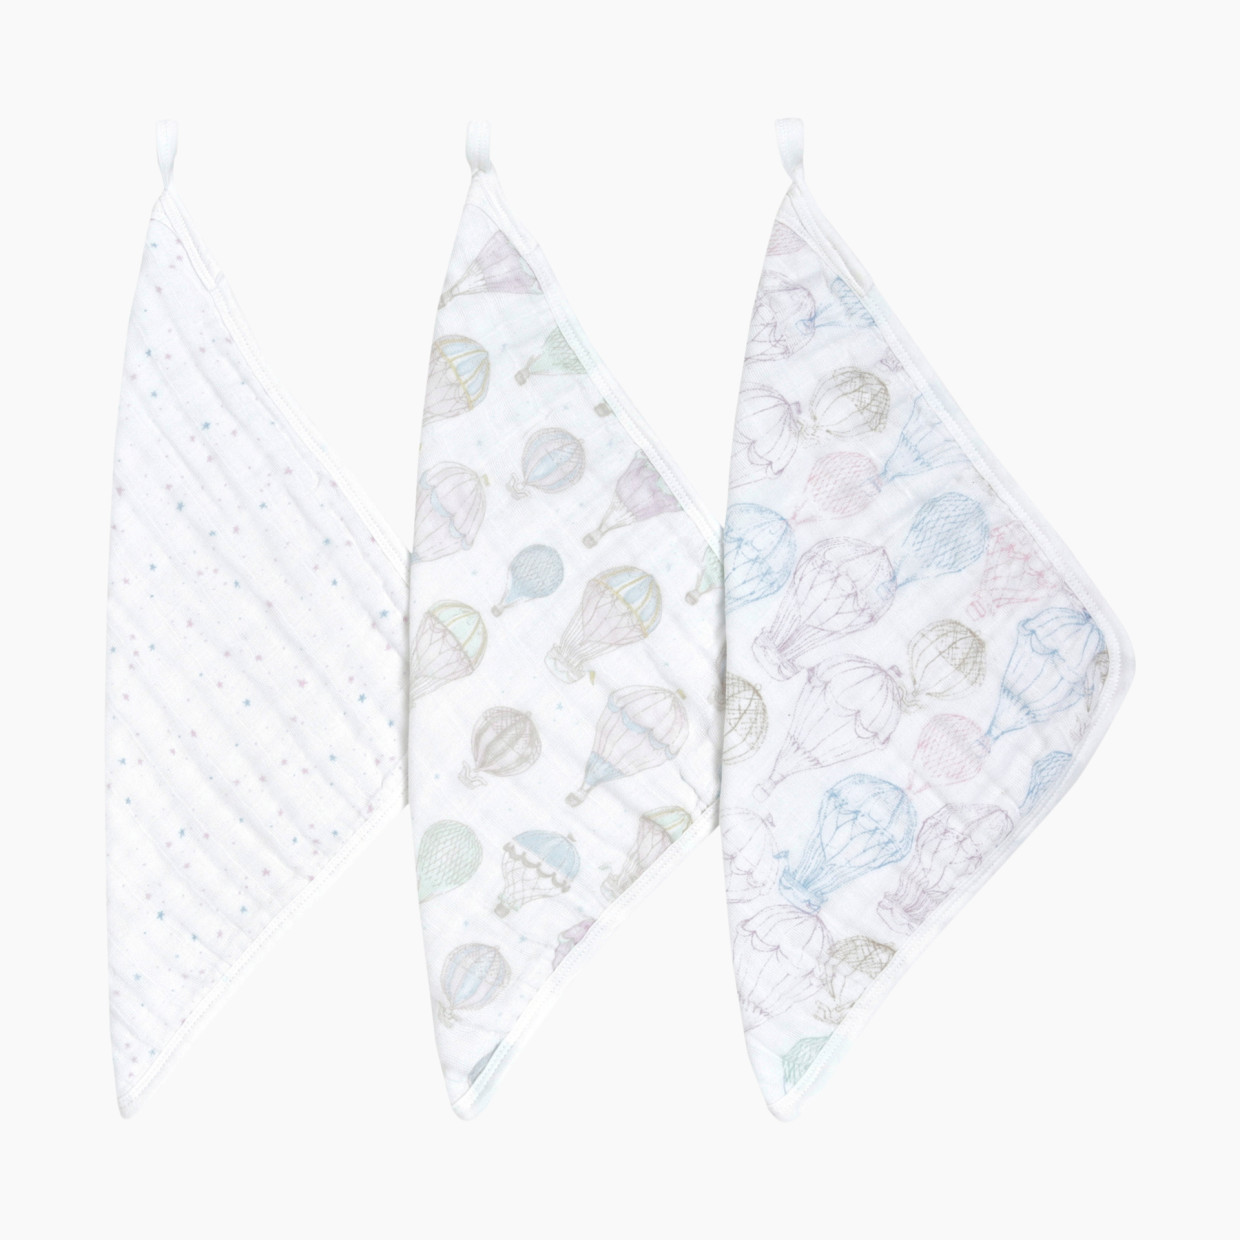 Aden + Anais Organic Washcloth (3 Pack) - Above The Clouds.